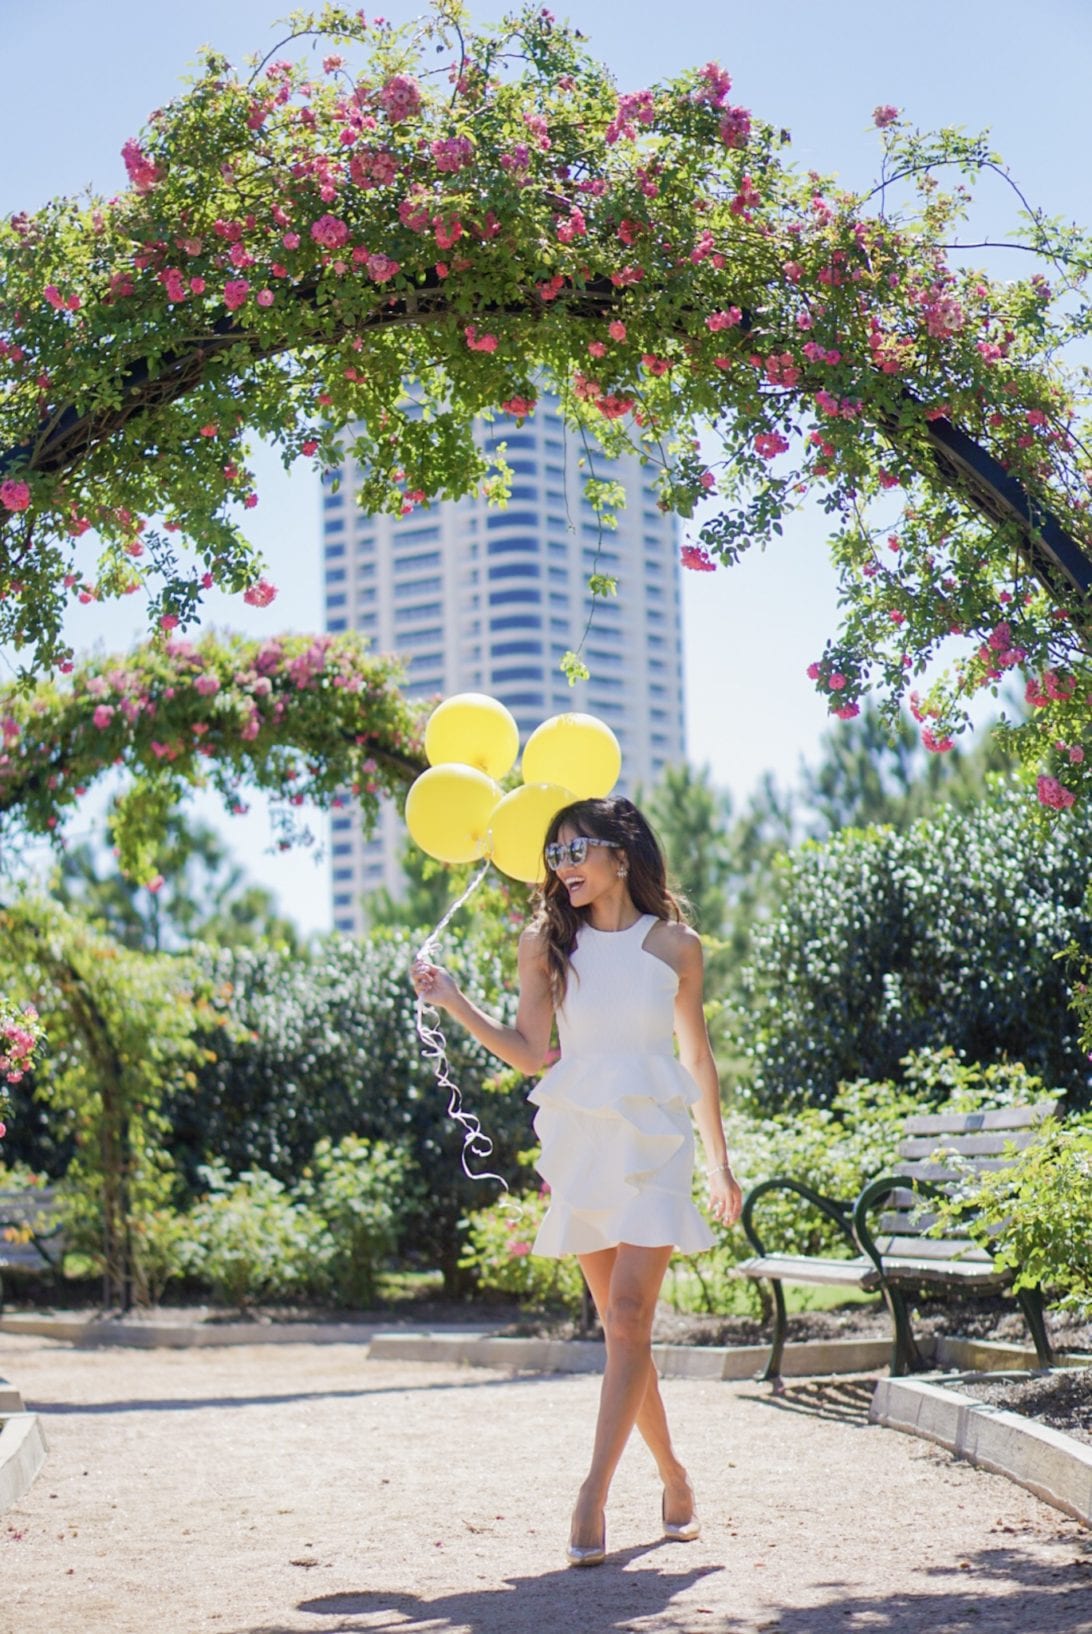 birthday outfit, balloons, park, white ruffle dress